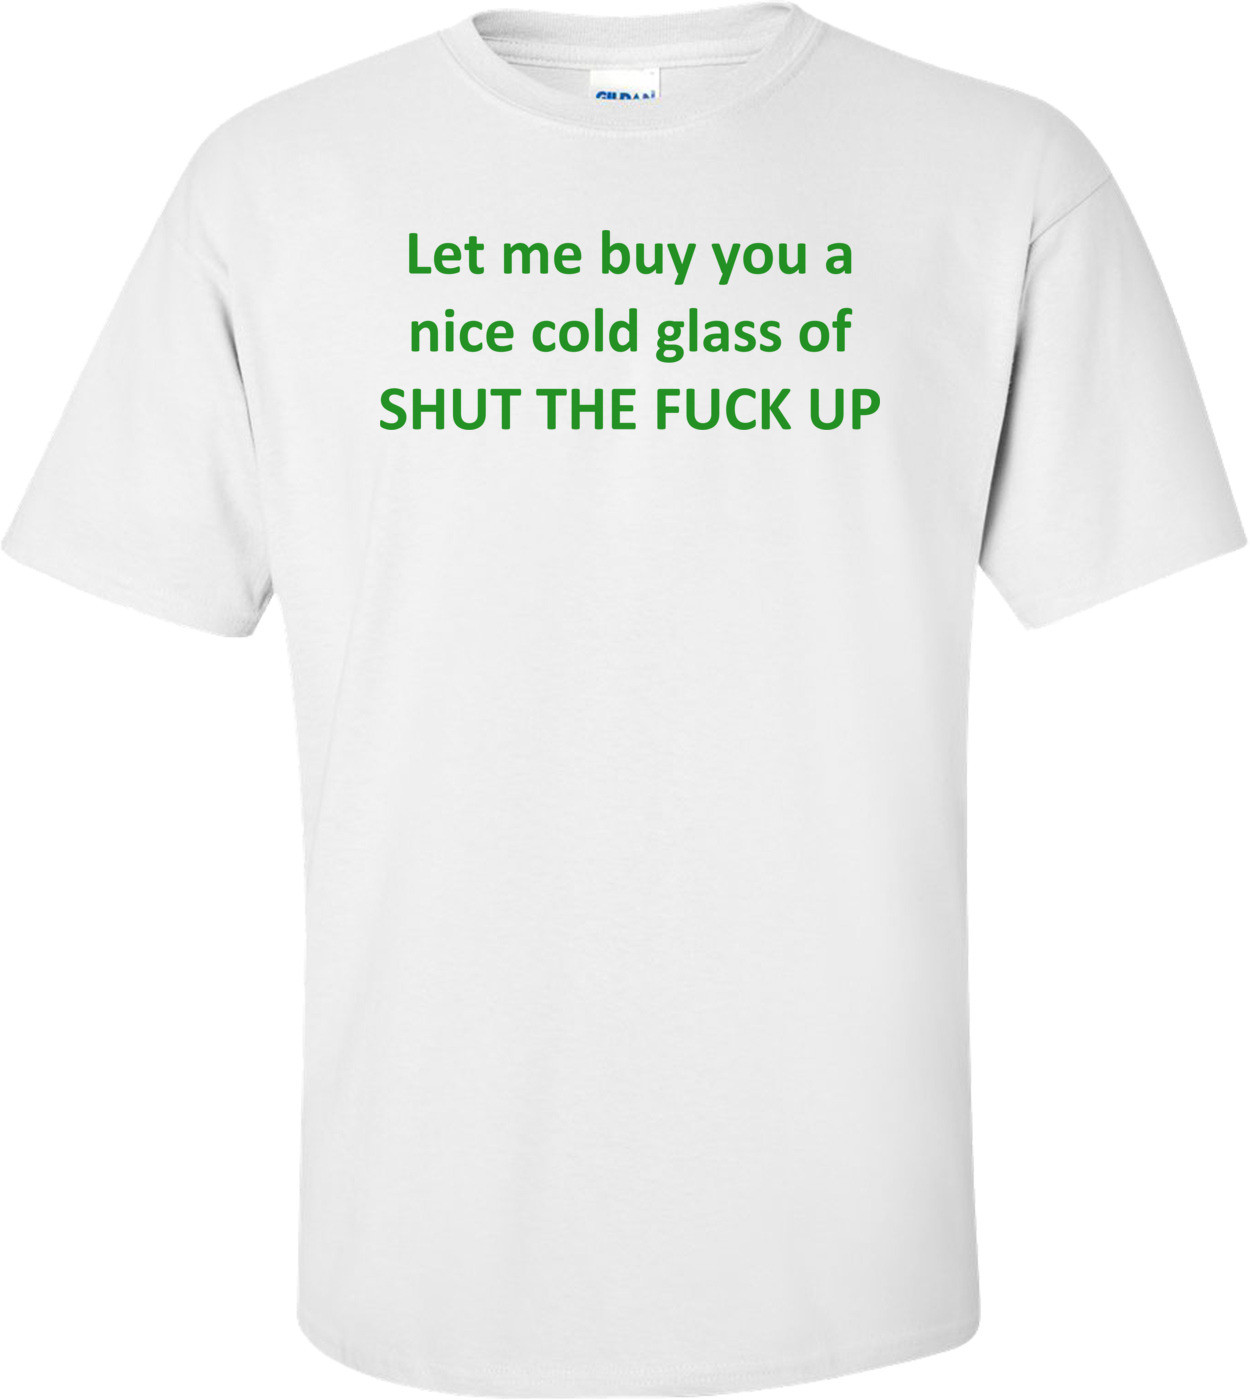 Let me buy you a nice cold glass of SHUT THE FUCK UP Shirt